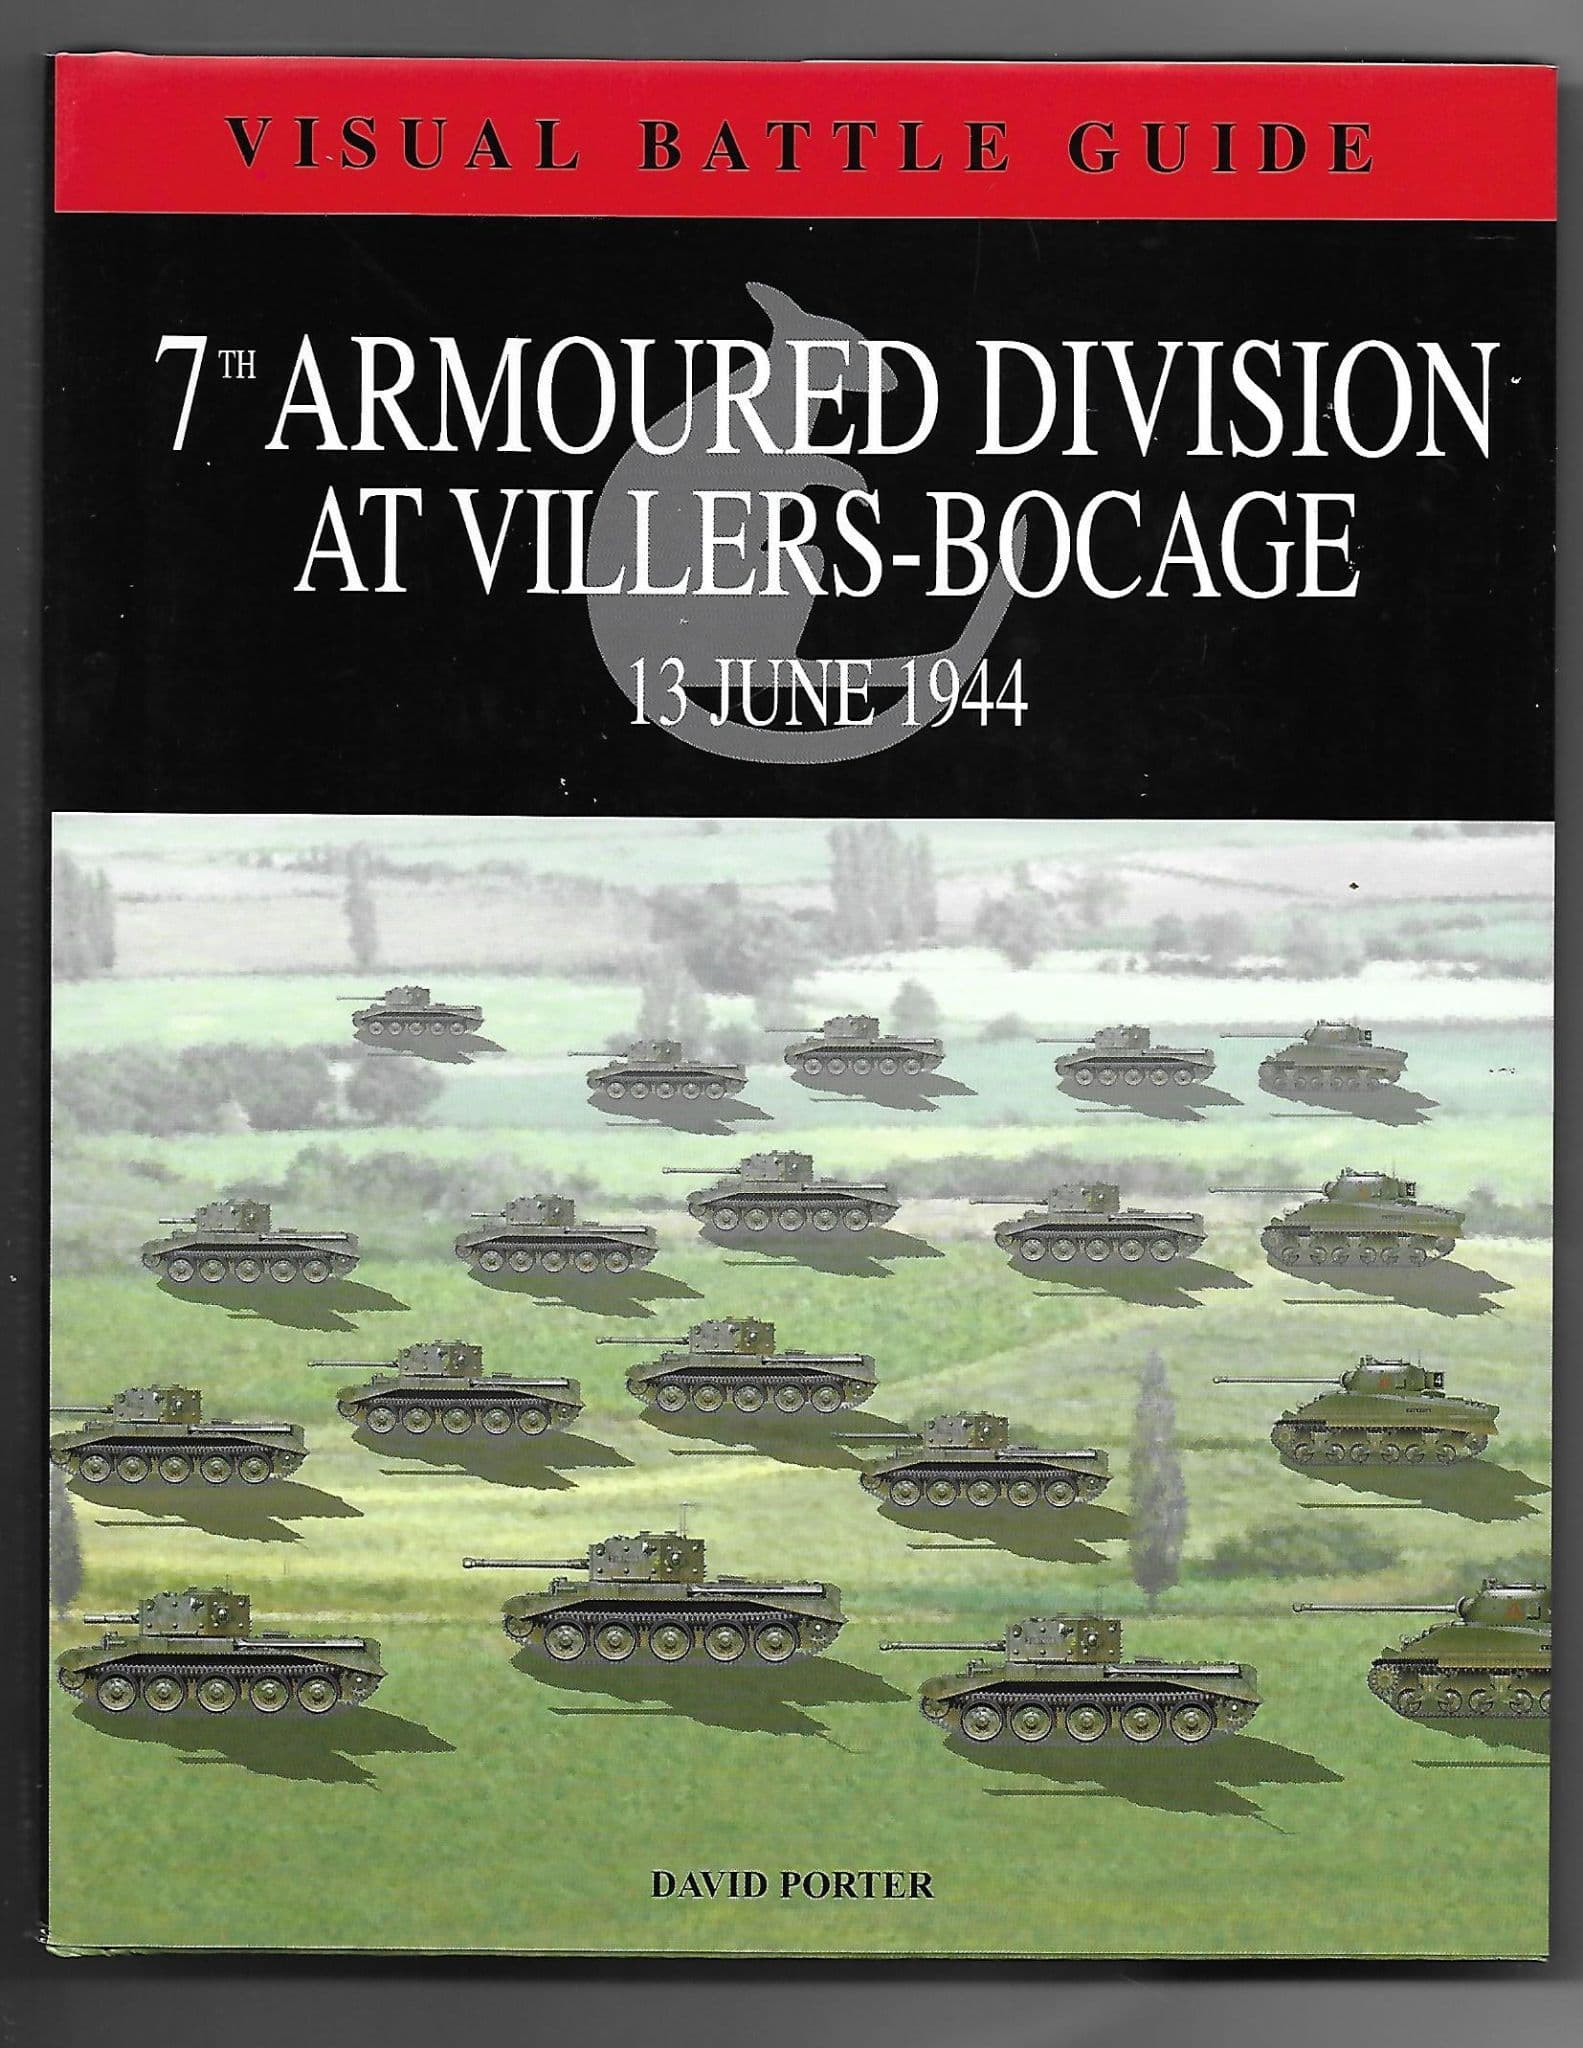 7th Armoured Division at Villers-Bocage, 13 June 1944